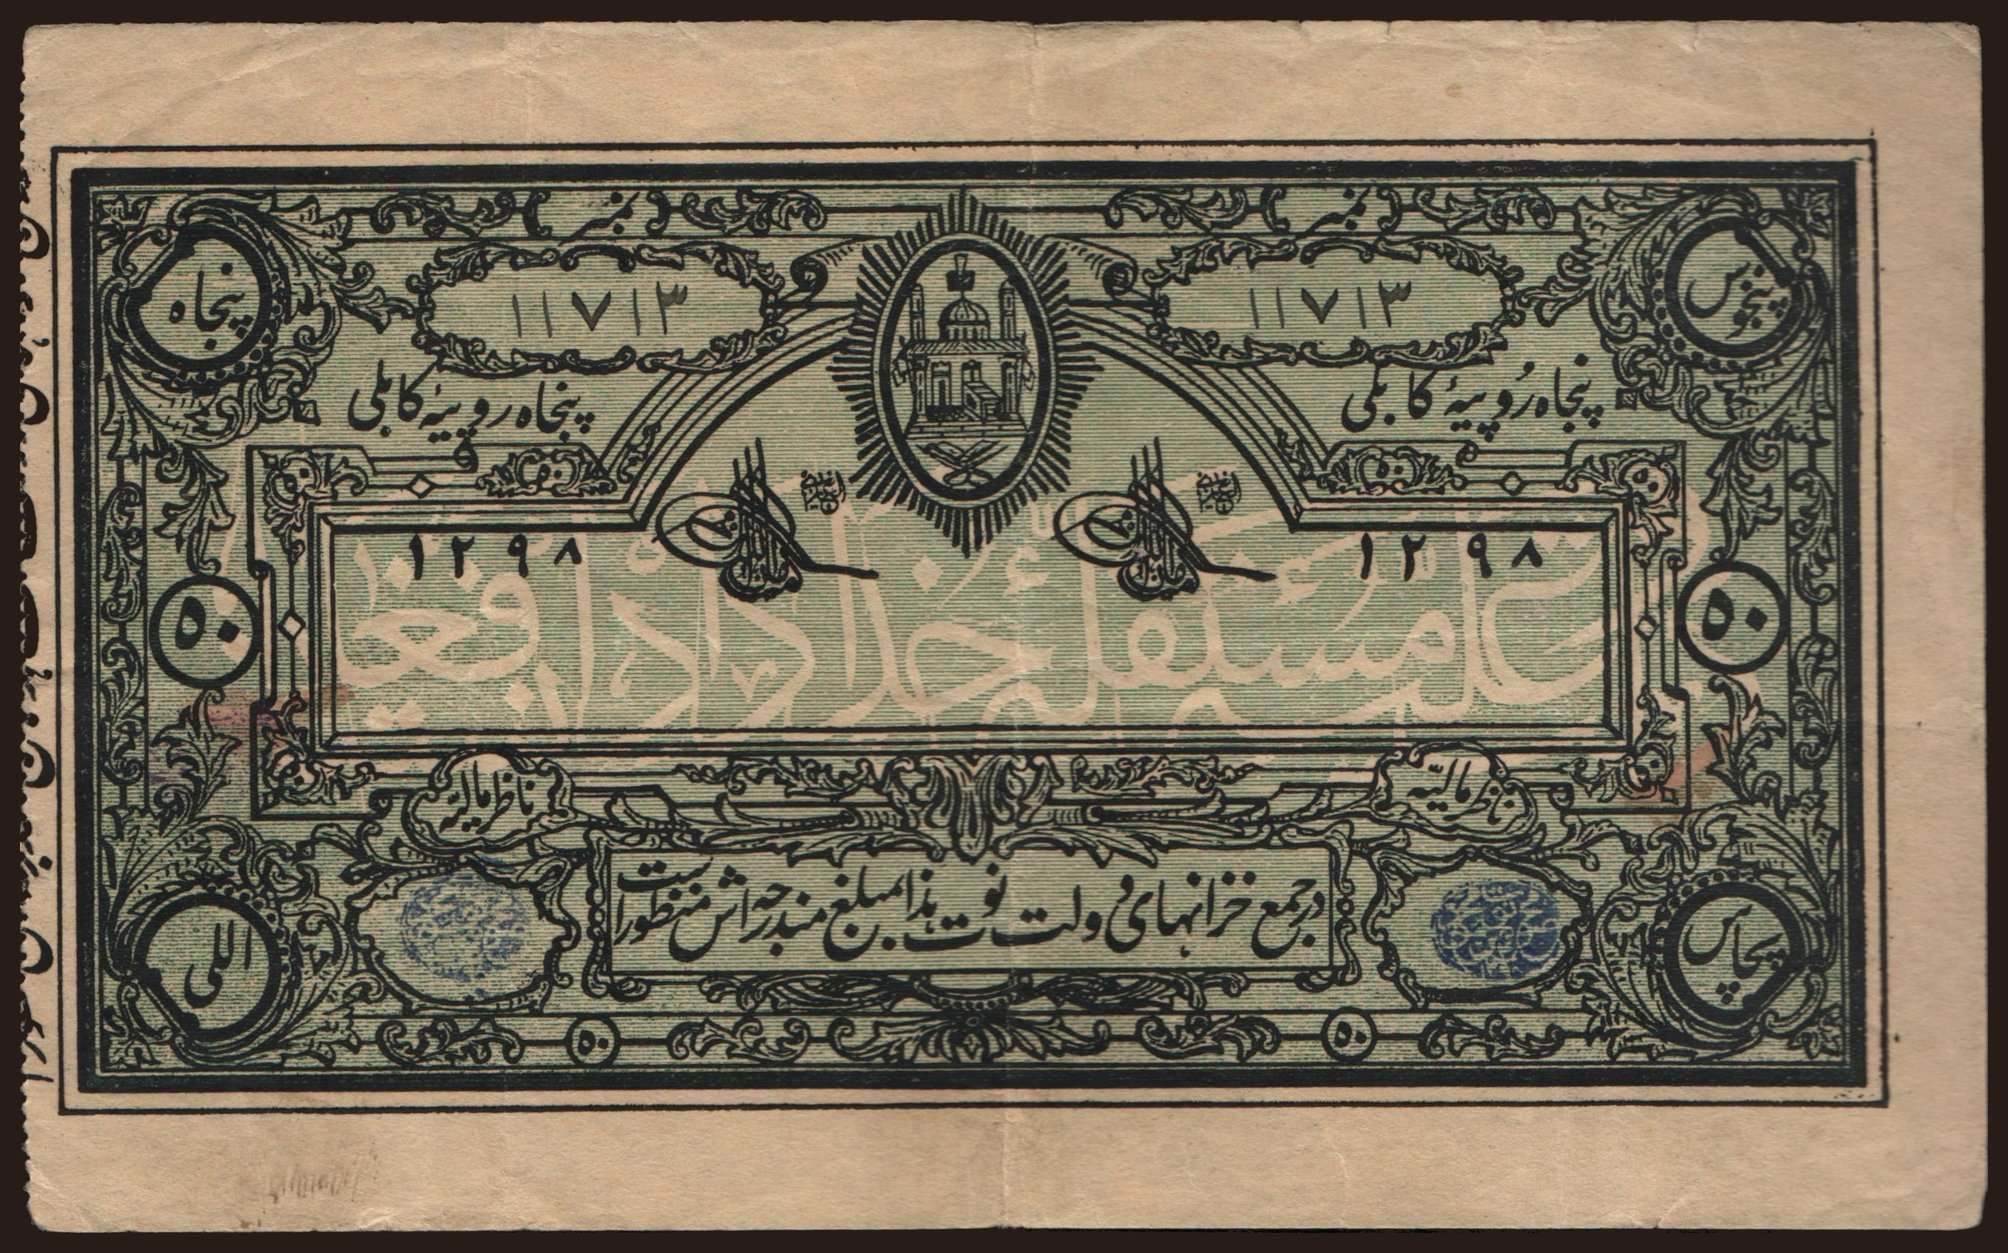 50 rupees, 1919